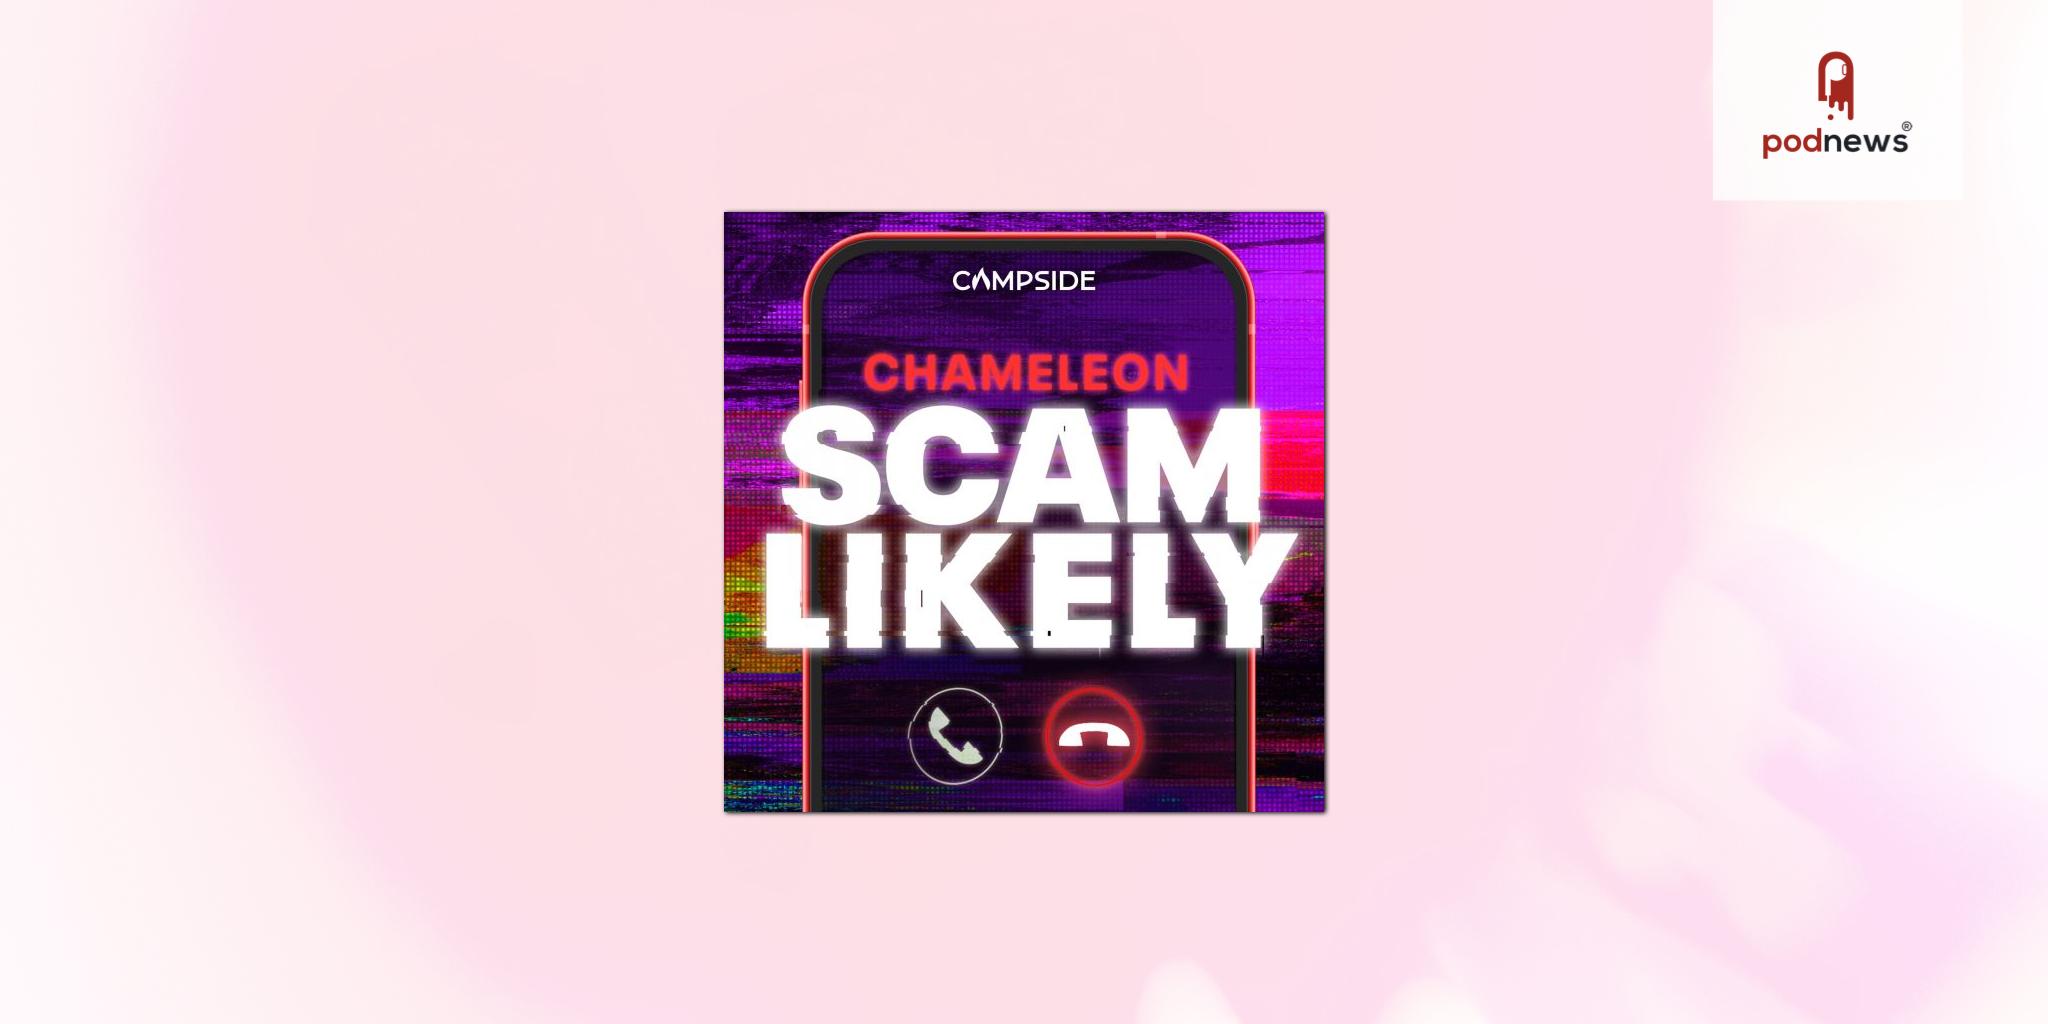 Chameleon: Scam Likely, season four of hit investigative podcast from Campside Media, out today